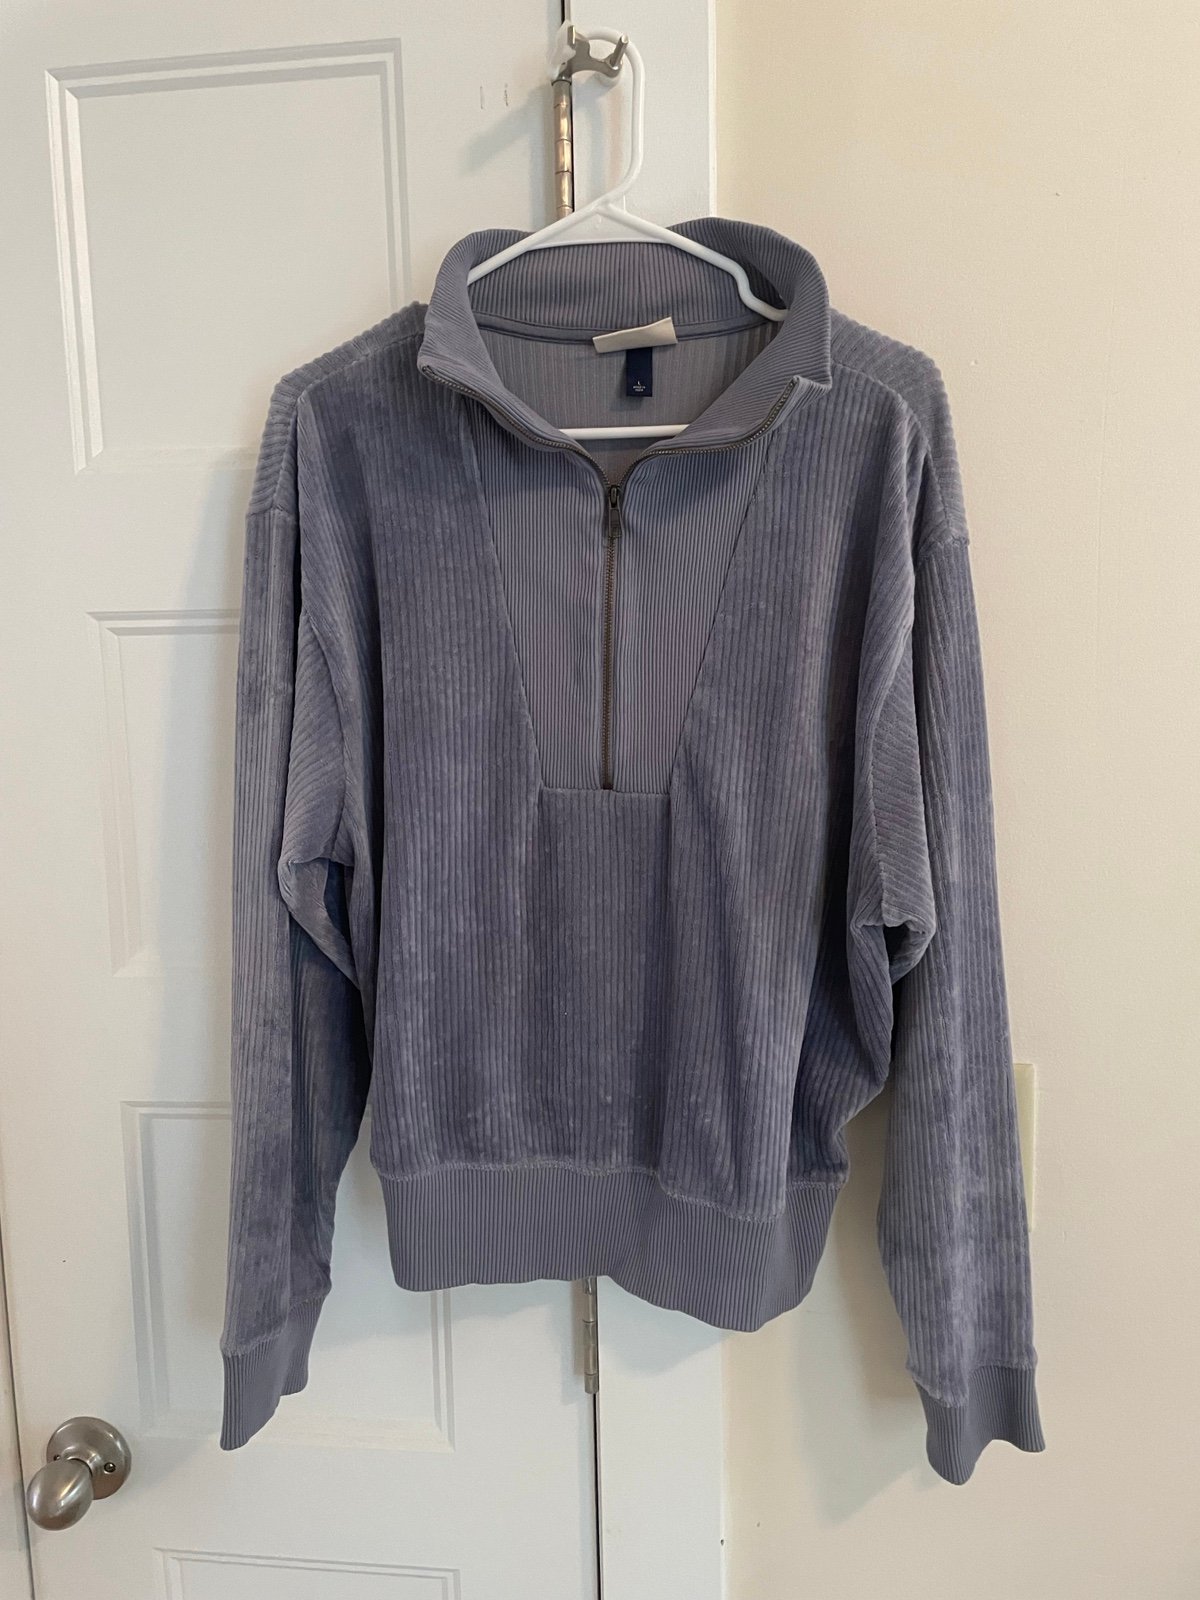 Discounted Pull-over quarter zip sweater OhXTDP2d1 for sale